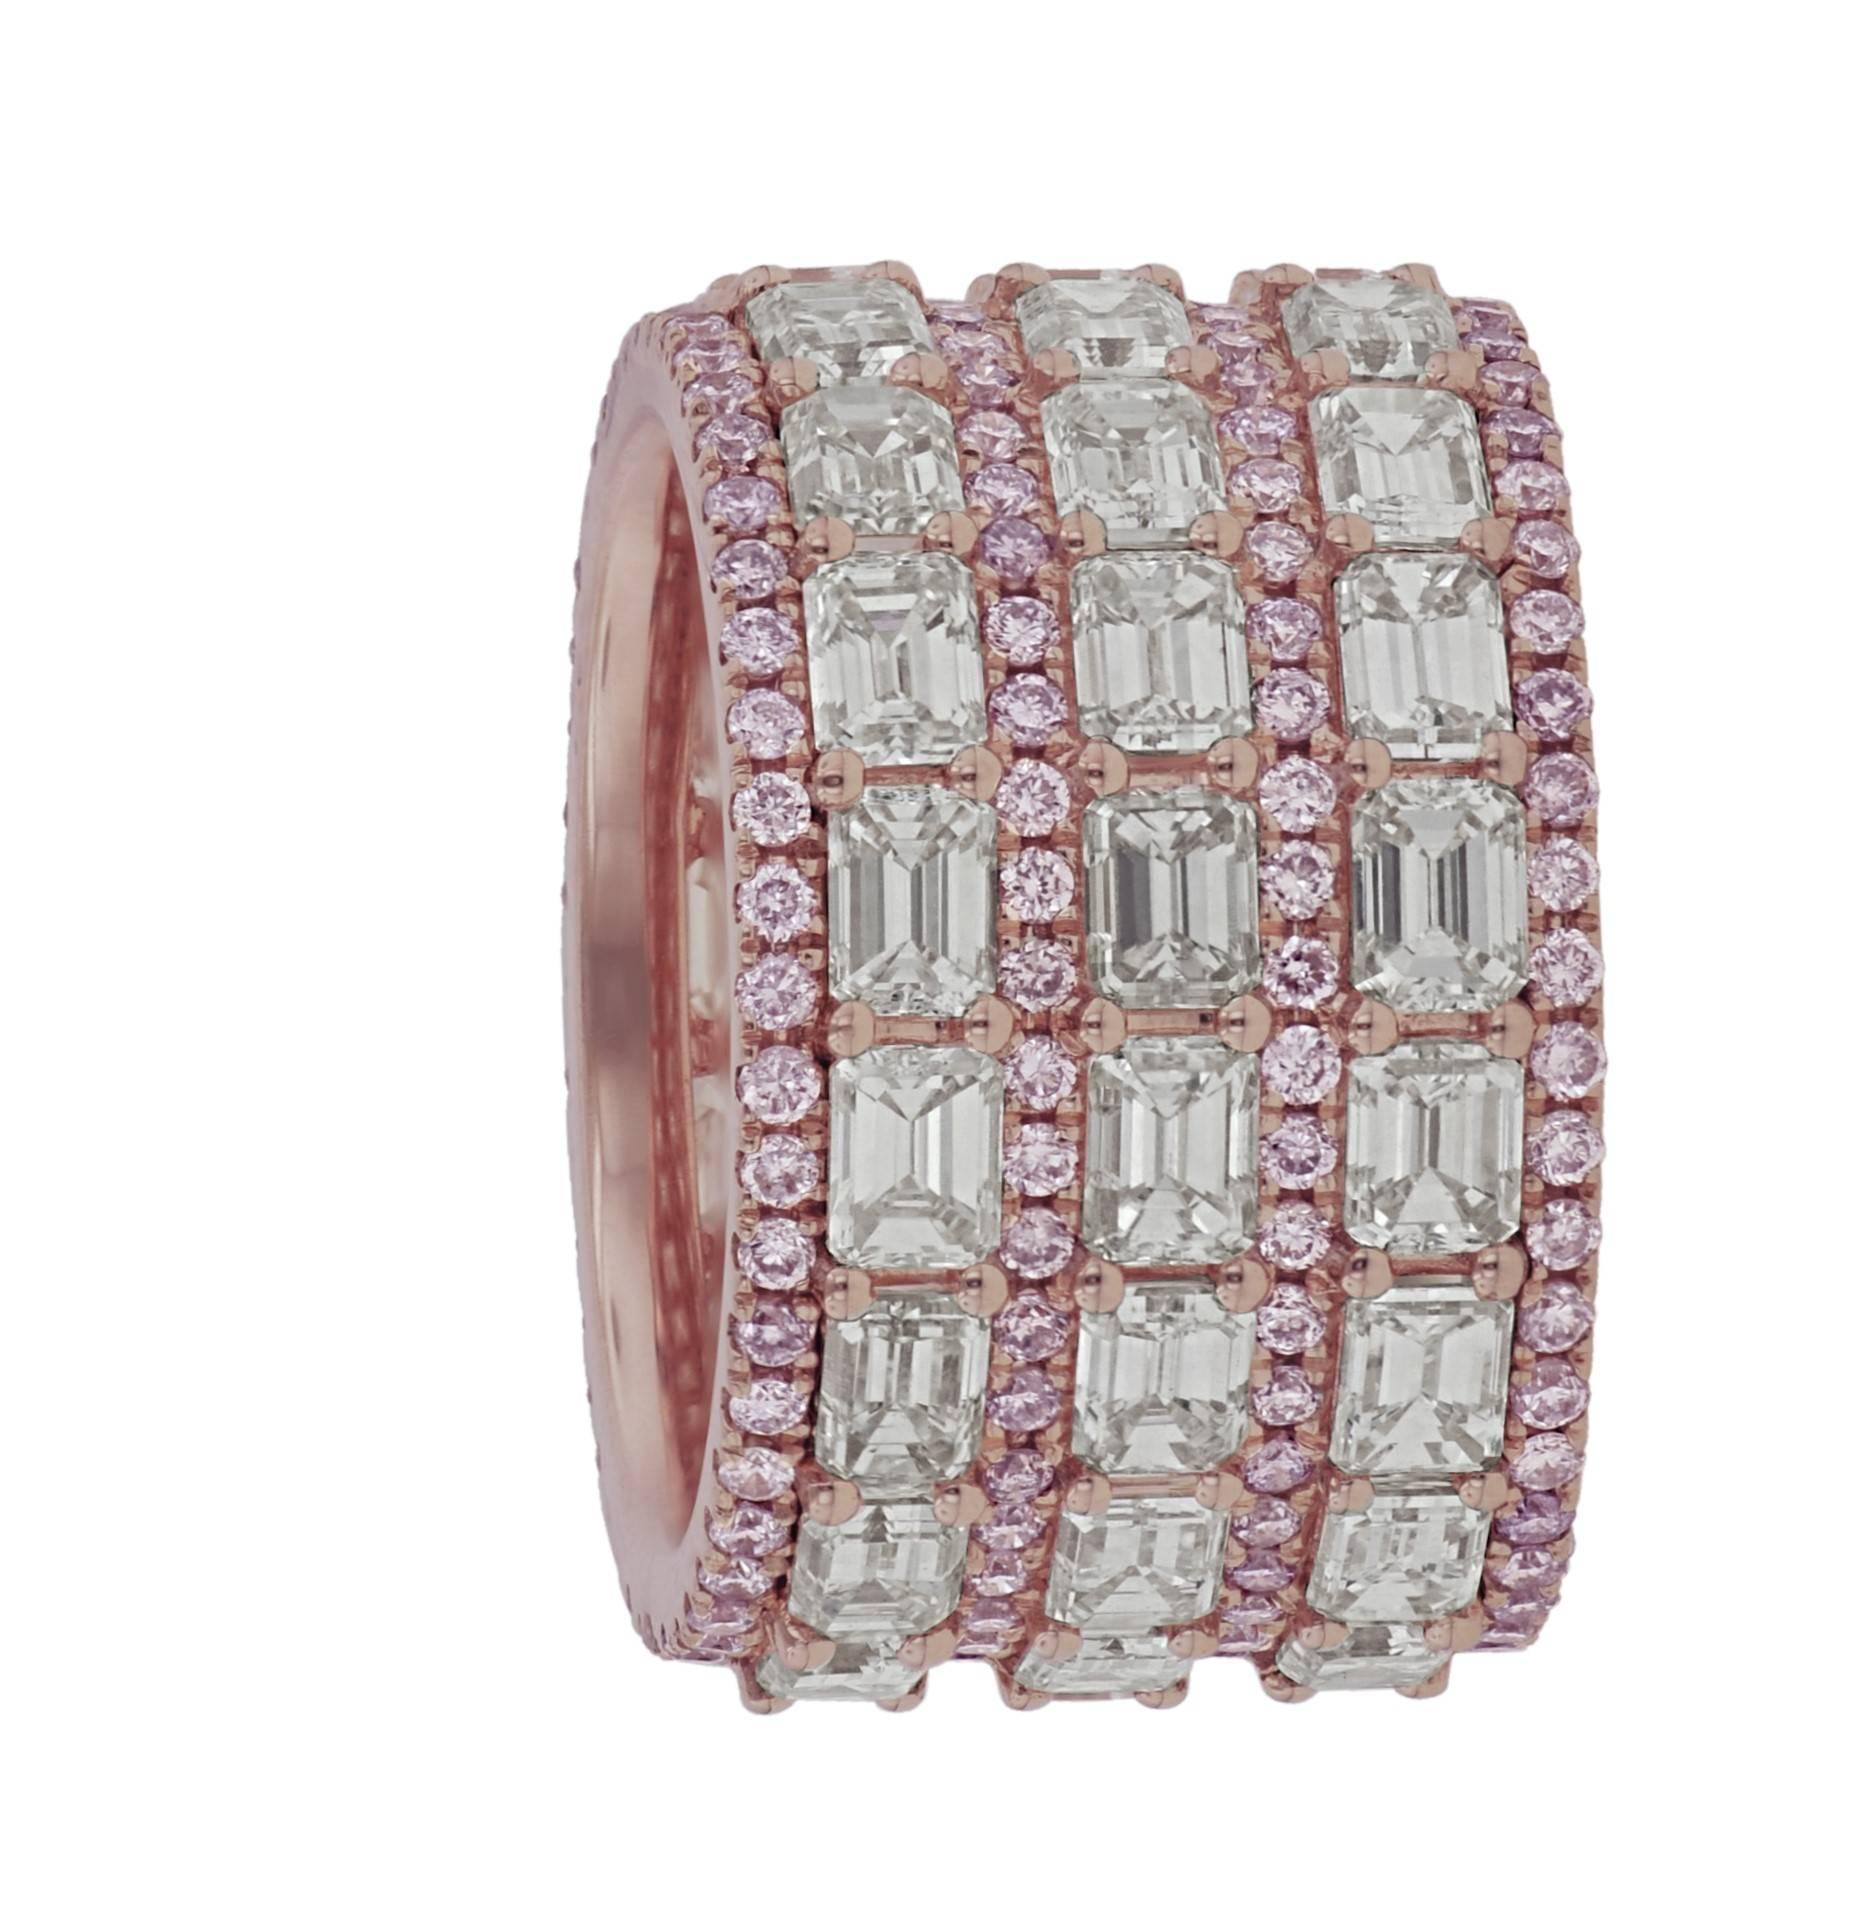 Natural Pink and White Diamond Band, features 11.23 Carats of Emerald cut diamonds, surrounded by Natural Pink Round Brilliant Cut Diamonds. Set in 18KT Rose Gold. 

